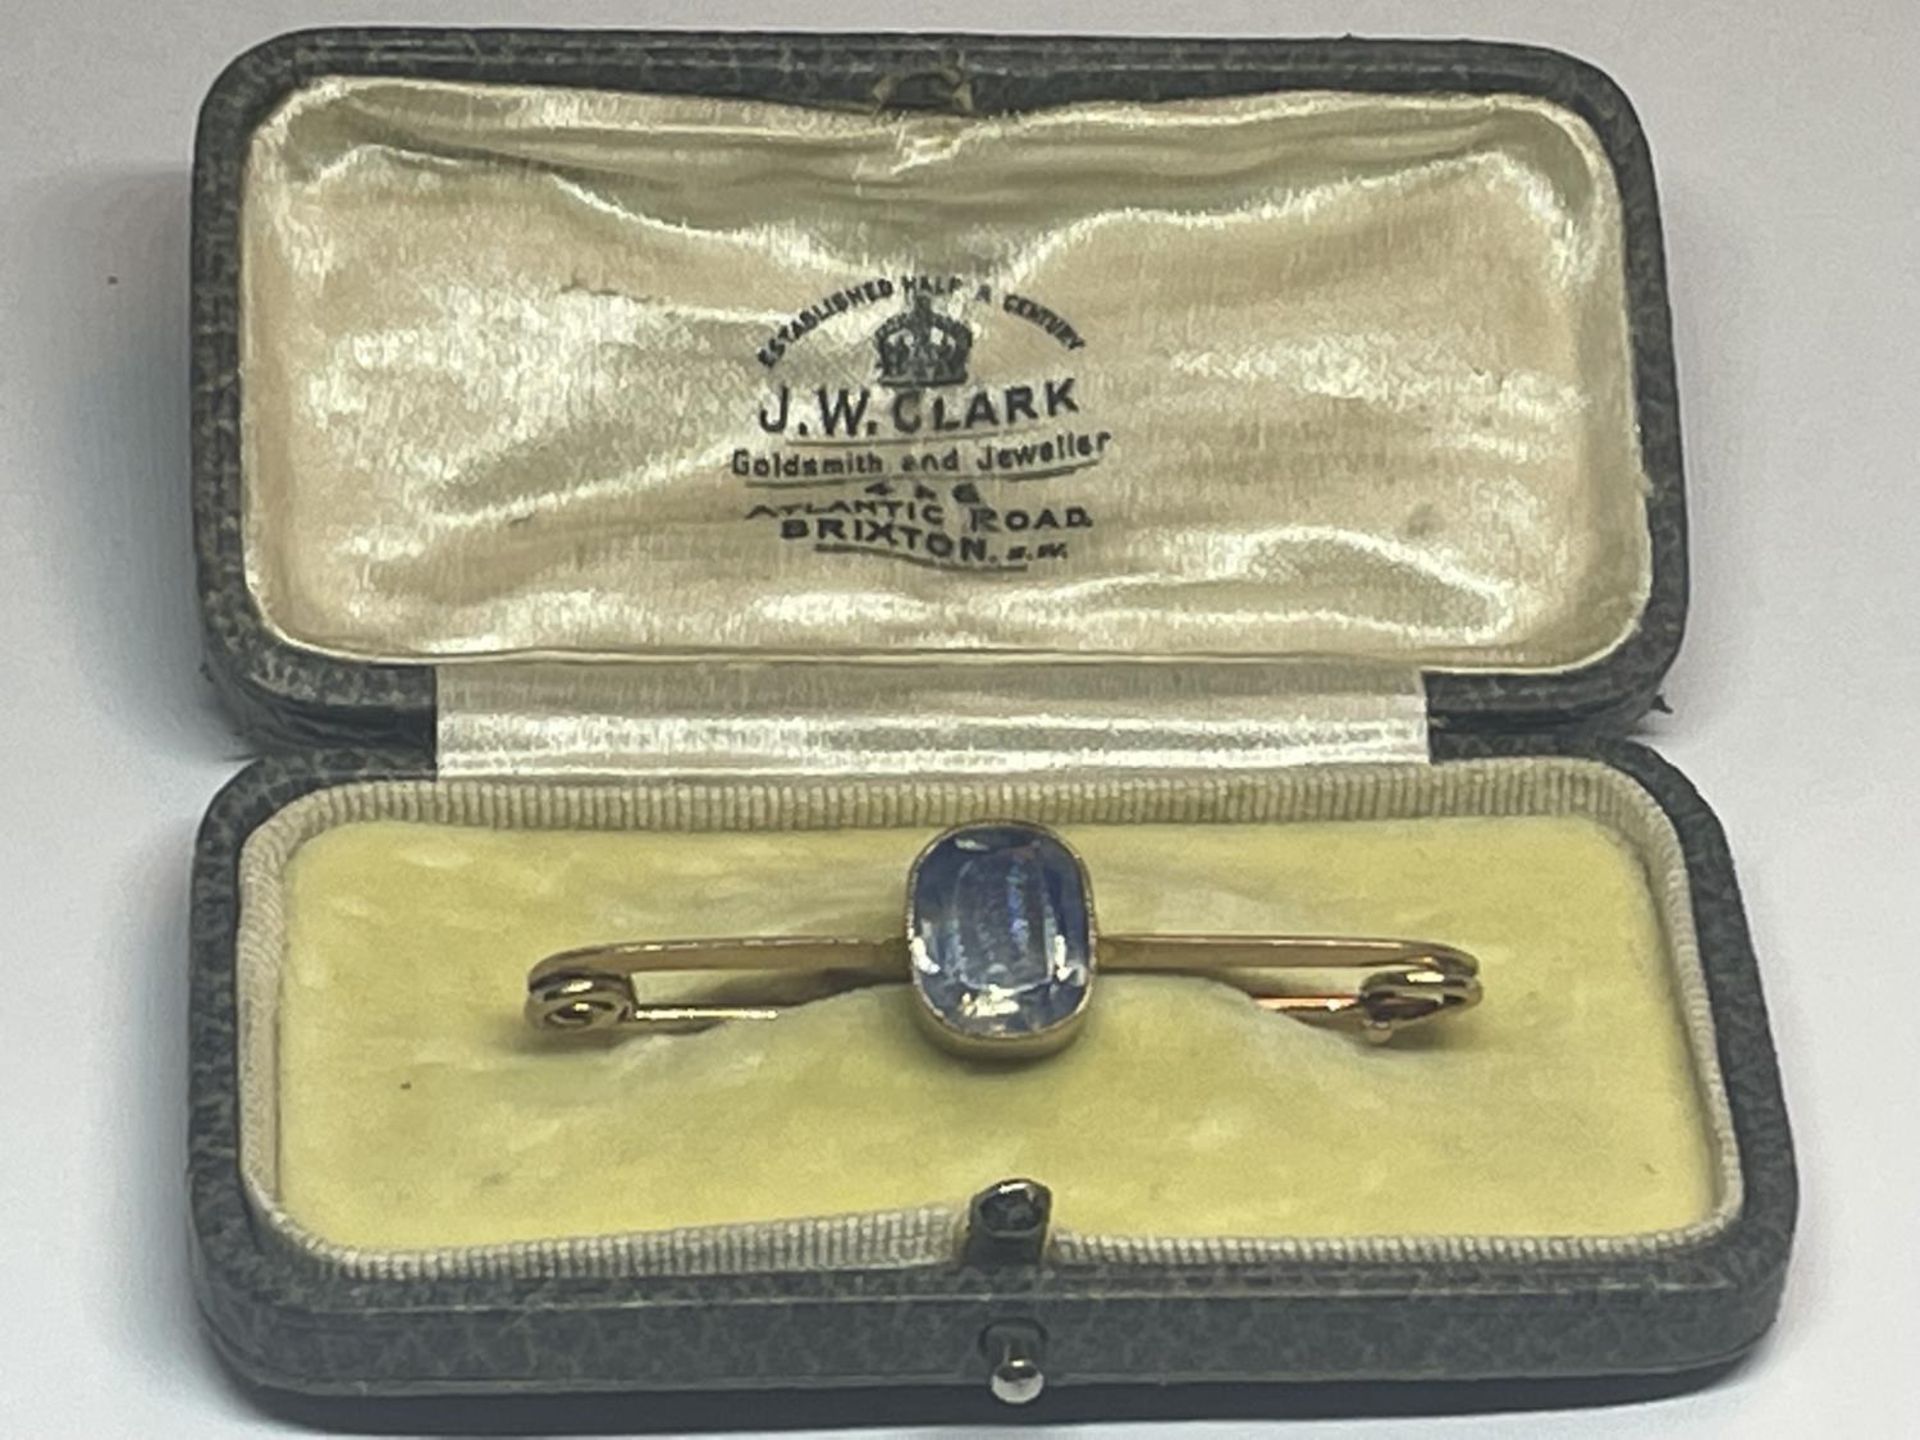 A 9 CARAT GOLD BROOCH WITH PLAE BLUE STONE GROSS WEIGHT 3.24 GRAMS IN A PRESENTATION BOX - Image 2 of 3